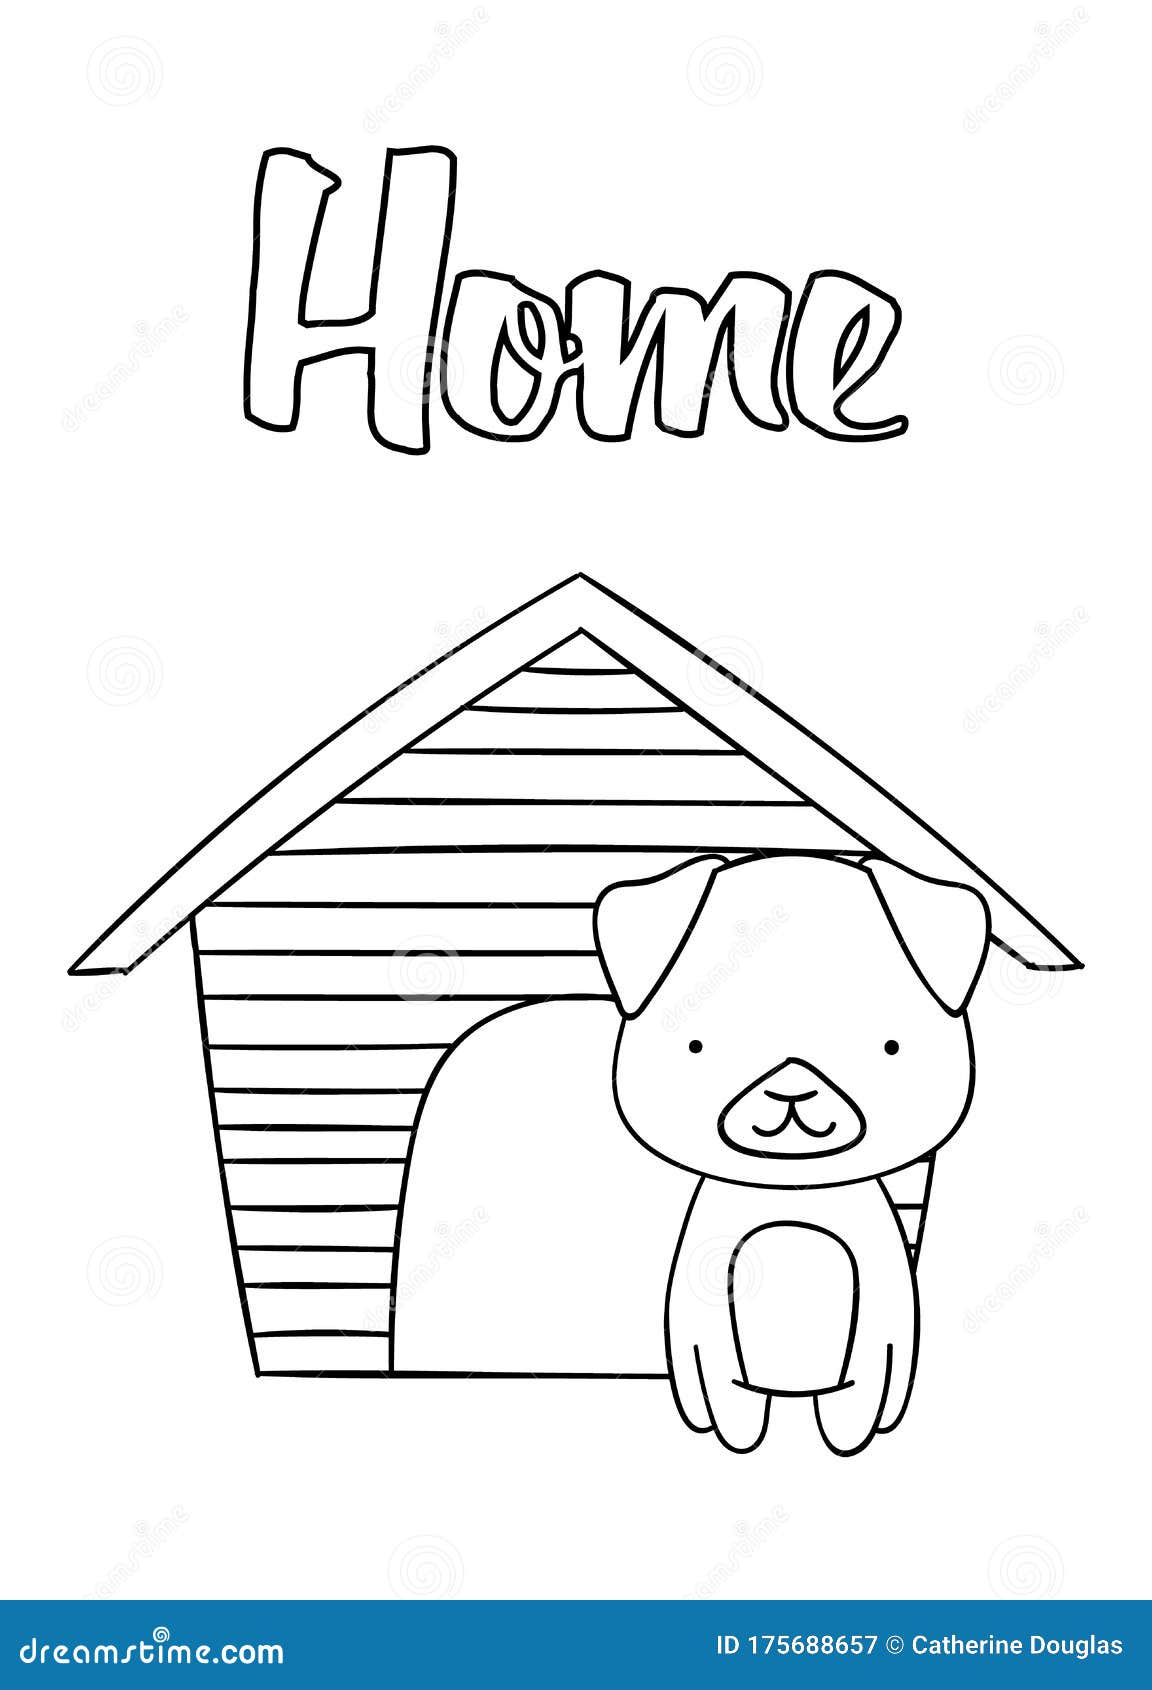 Coloring Pages Black And White Cute Hand Drawn Dog And Doghouse Doodles Lettering Home Stock Vector Illustration Of Home Isolated 175688657